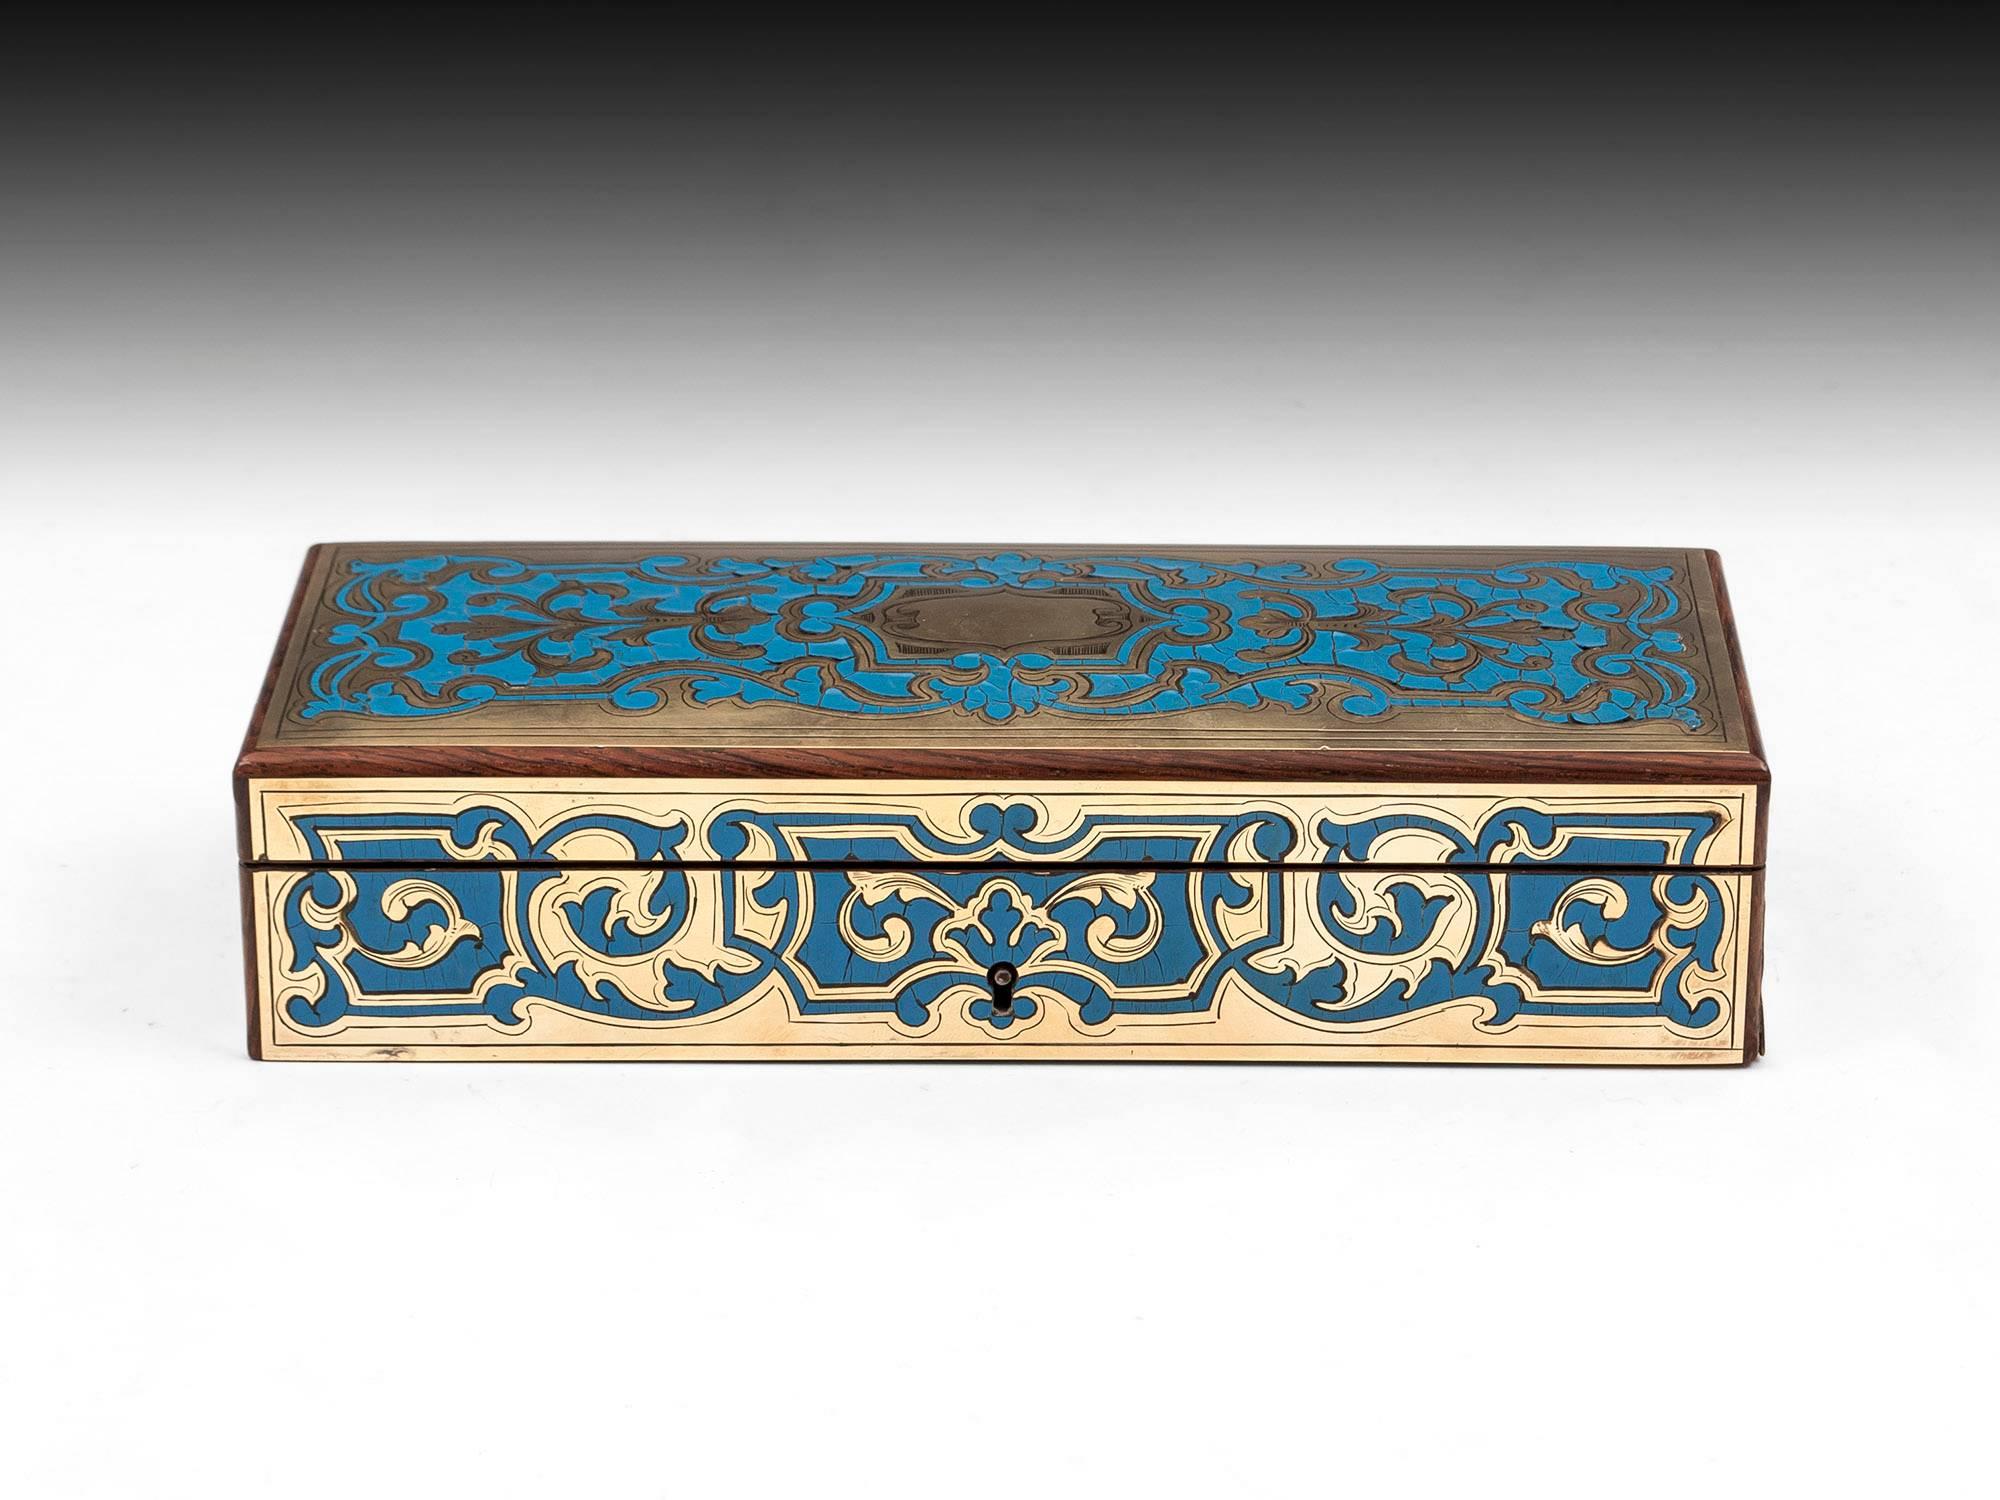 Boulle sewing box with beautiful engraved inlaid brass. With red silk paper and velvet lined interior with a removable tool tray fitted with various sewing tools with mother of pearl handles and elaborate engraving.

This exquisite eye-catching